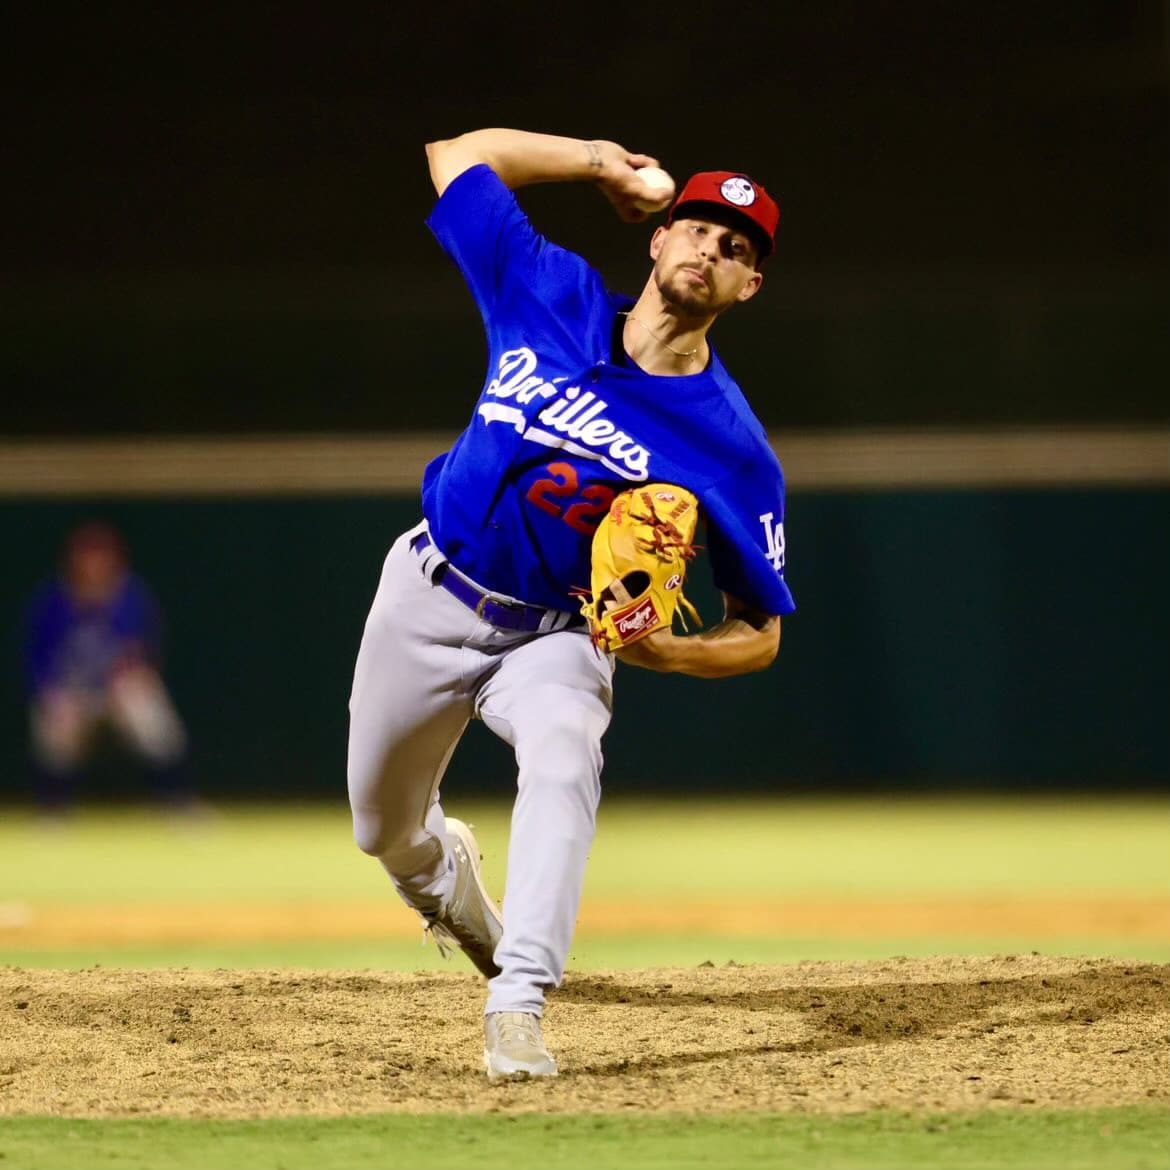 Ricky Vanasco pitching for the Tulsa Drillers.